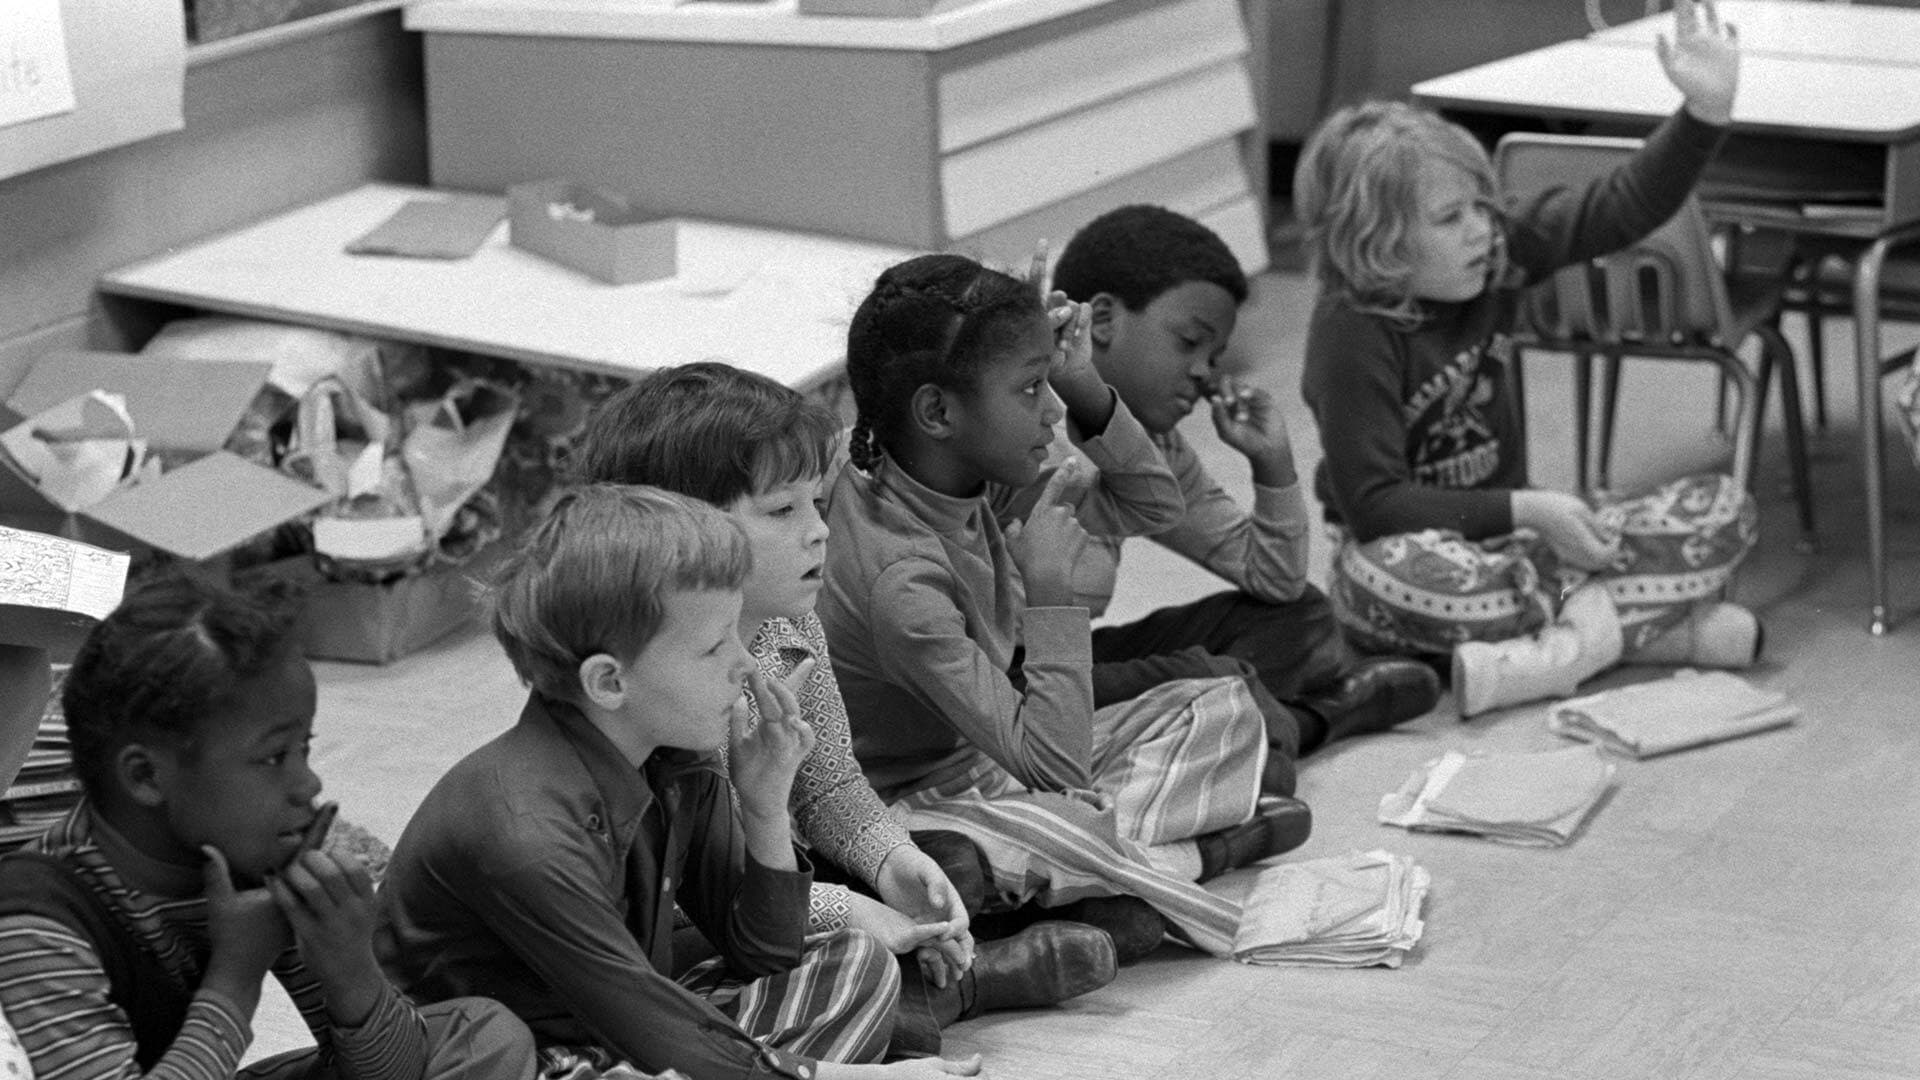 black and white children sit on the floor with papers